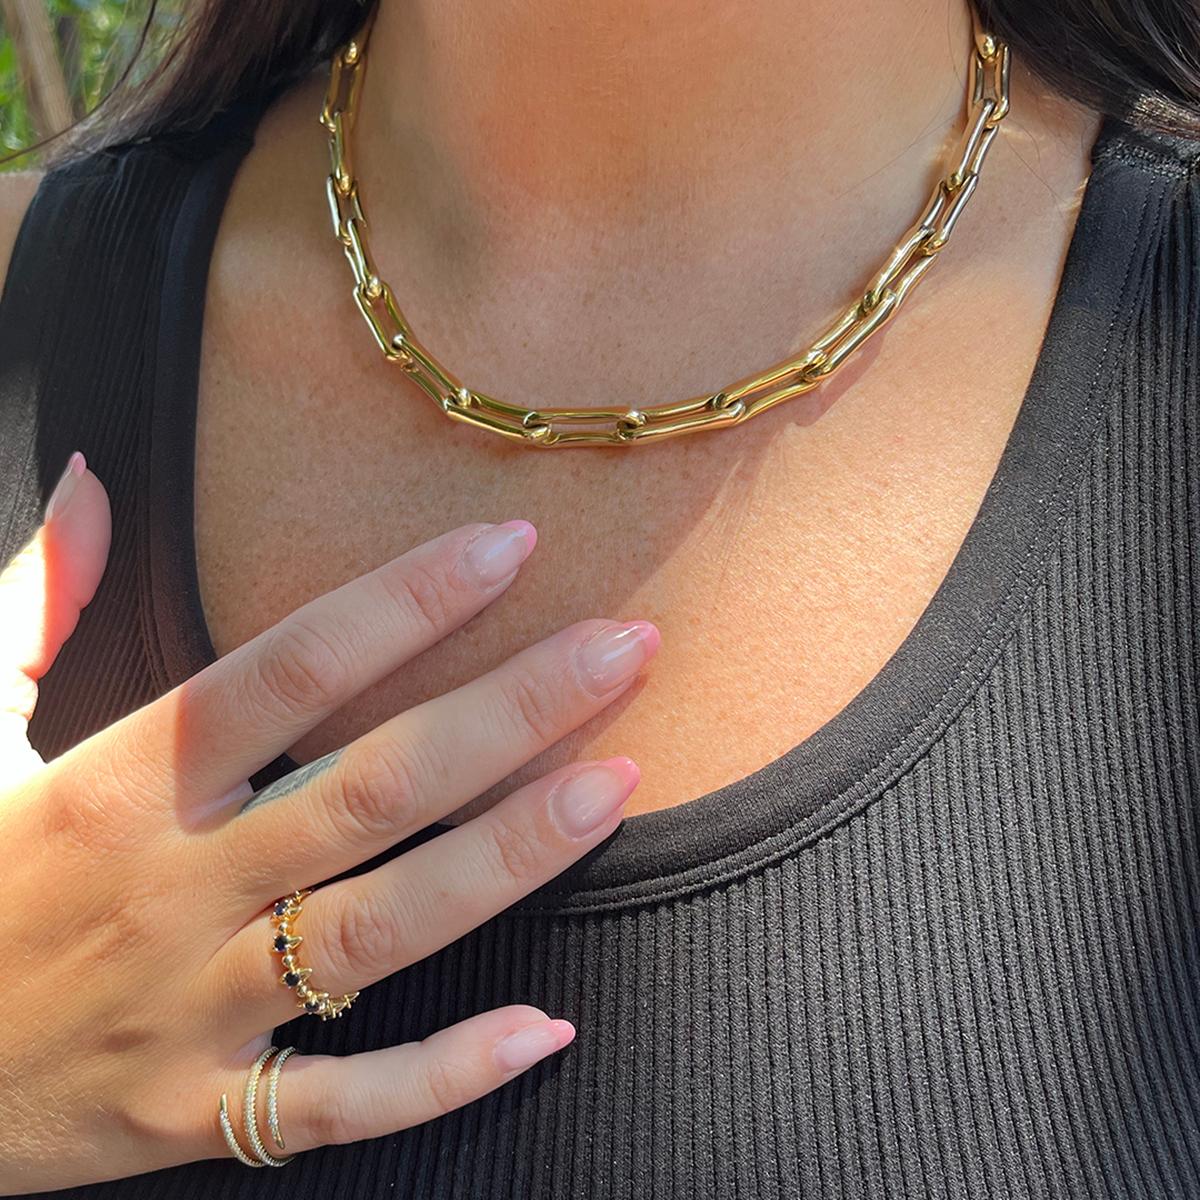 14k yellow gold bamboo chain link necklace.

Measurements: Each link measures 22mm wide., 16